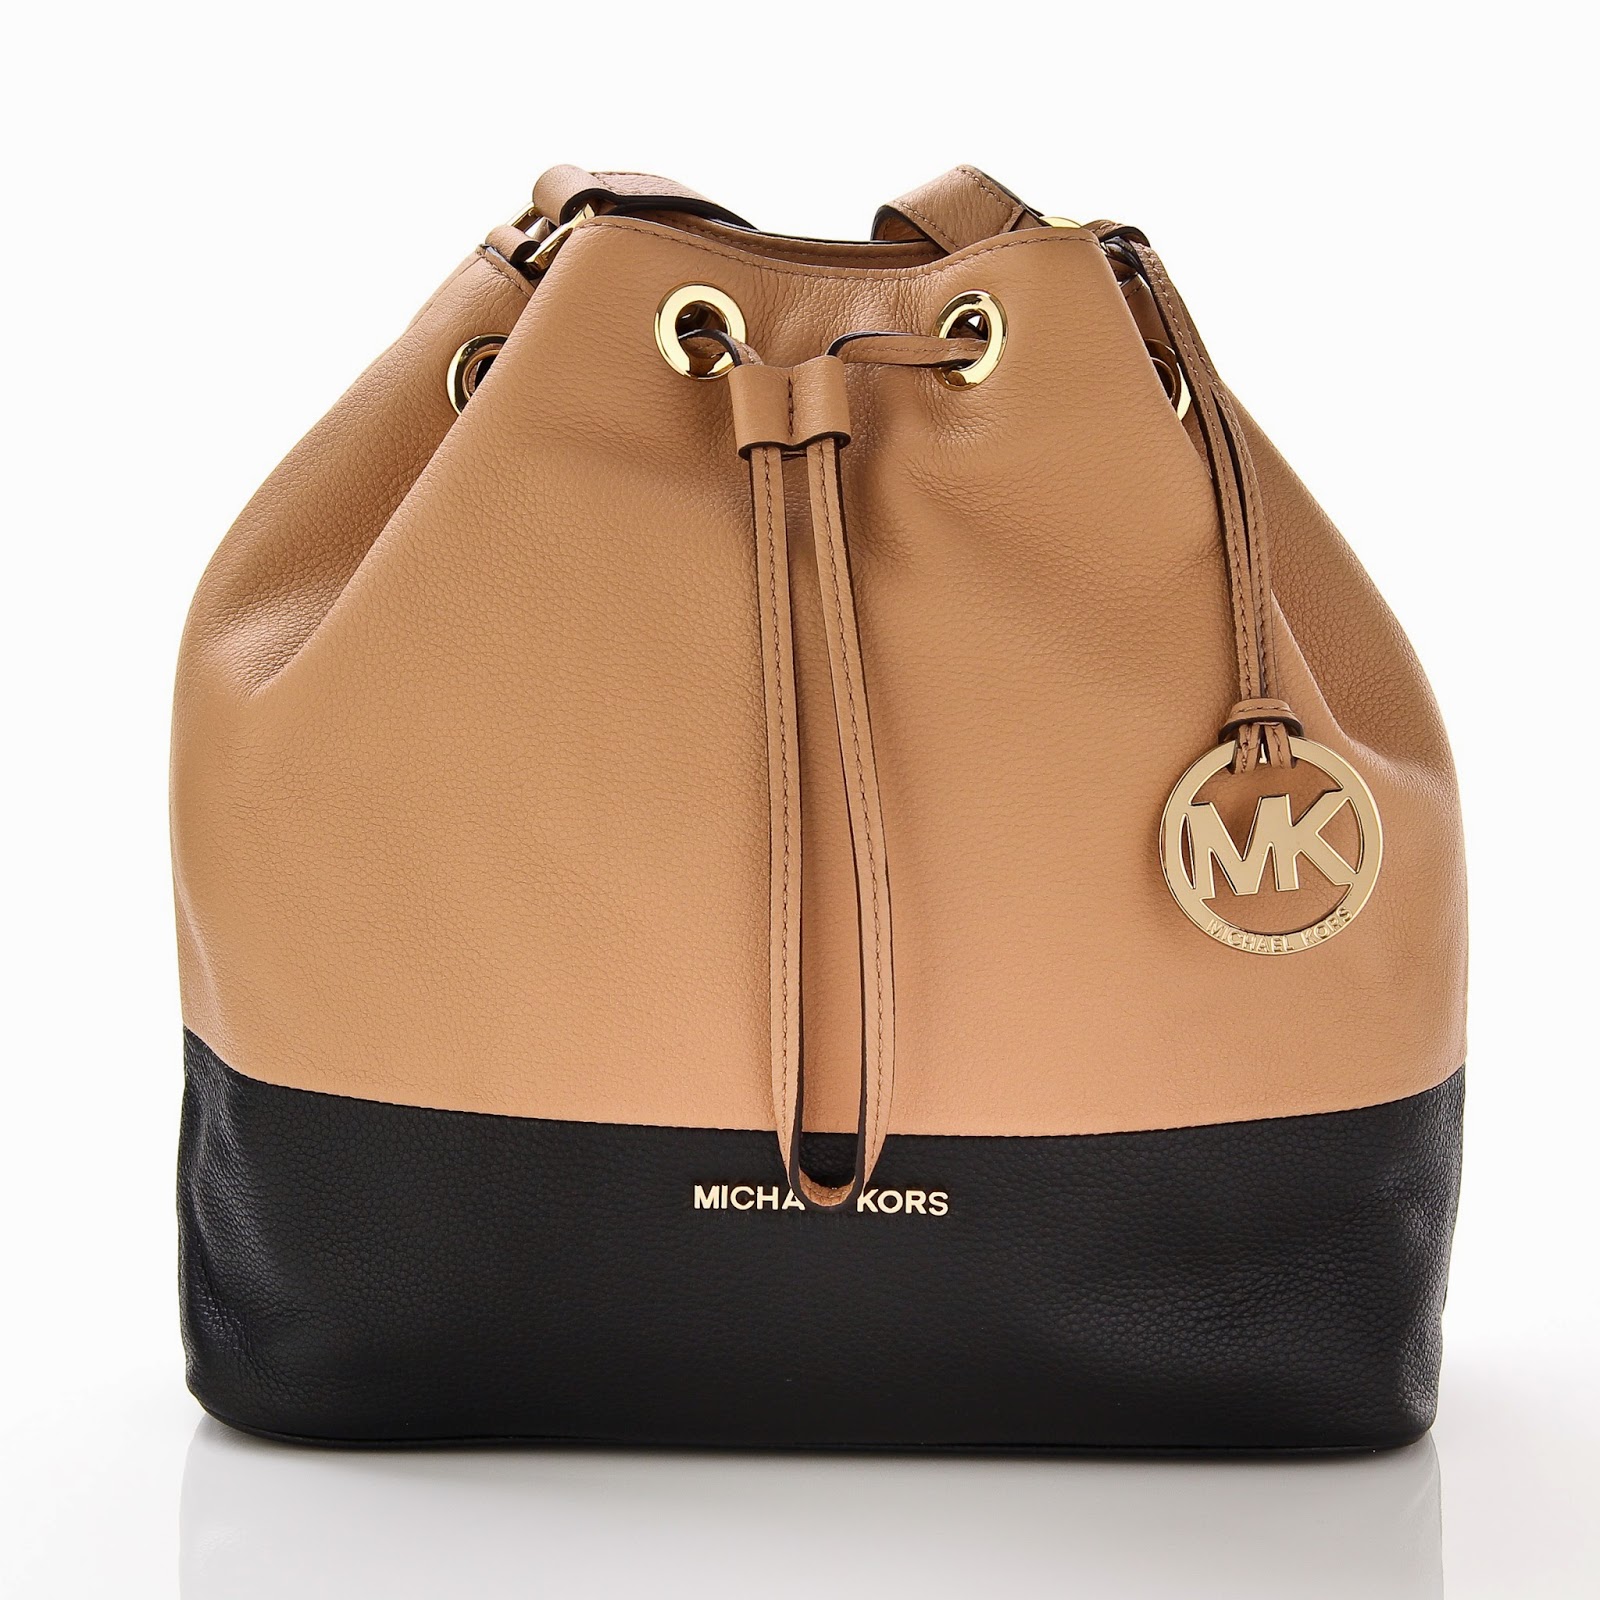 Michael Kors Spring-Summer 2015 - a glimpse of my favorite bags ...